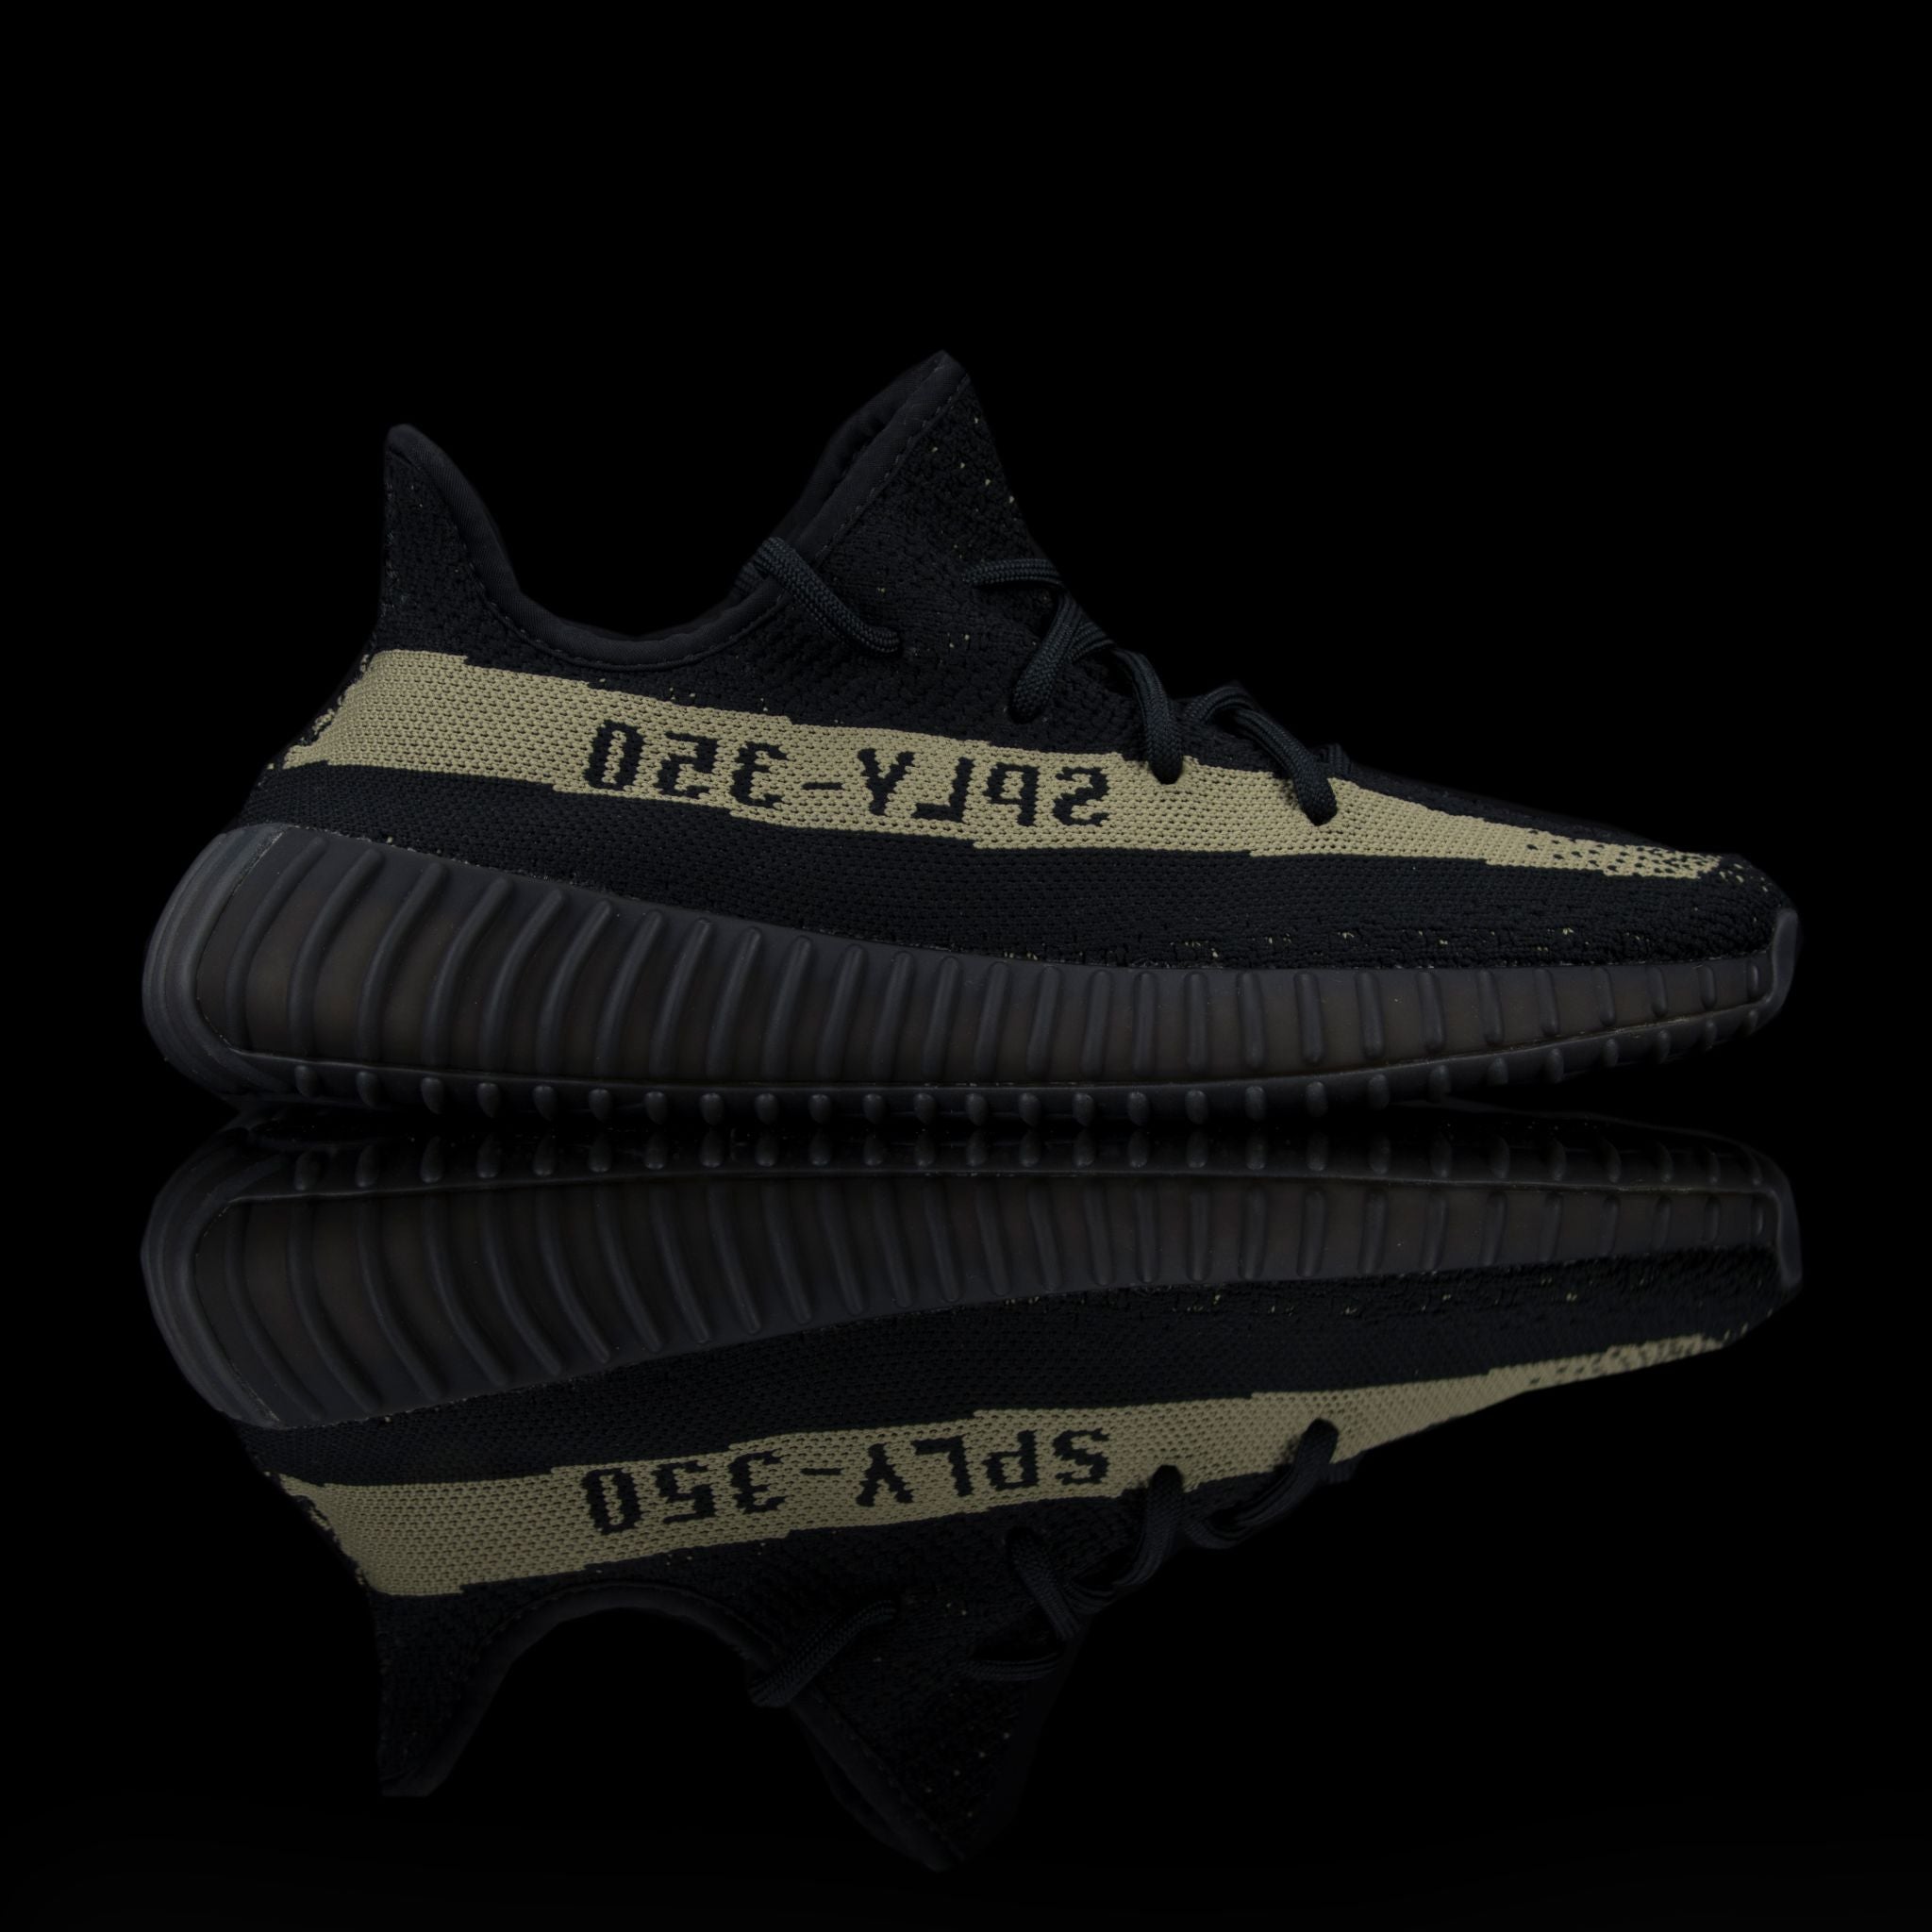 Adidas-Yeezy Boost 350-Product code: BY9611 Colour: Core Black/Green/Core Black Year of release: 2016-fabriqe.com